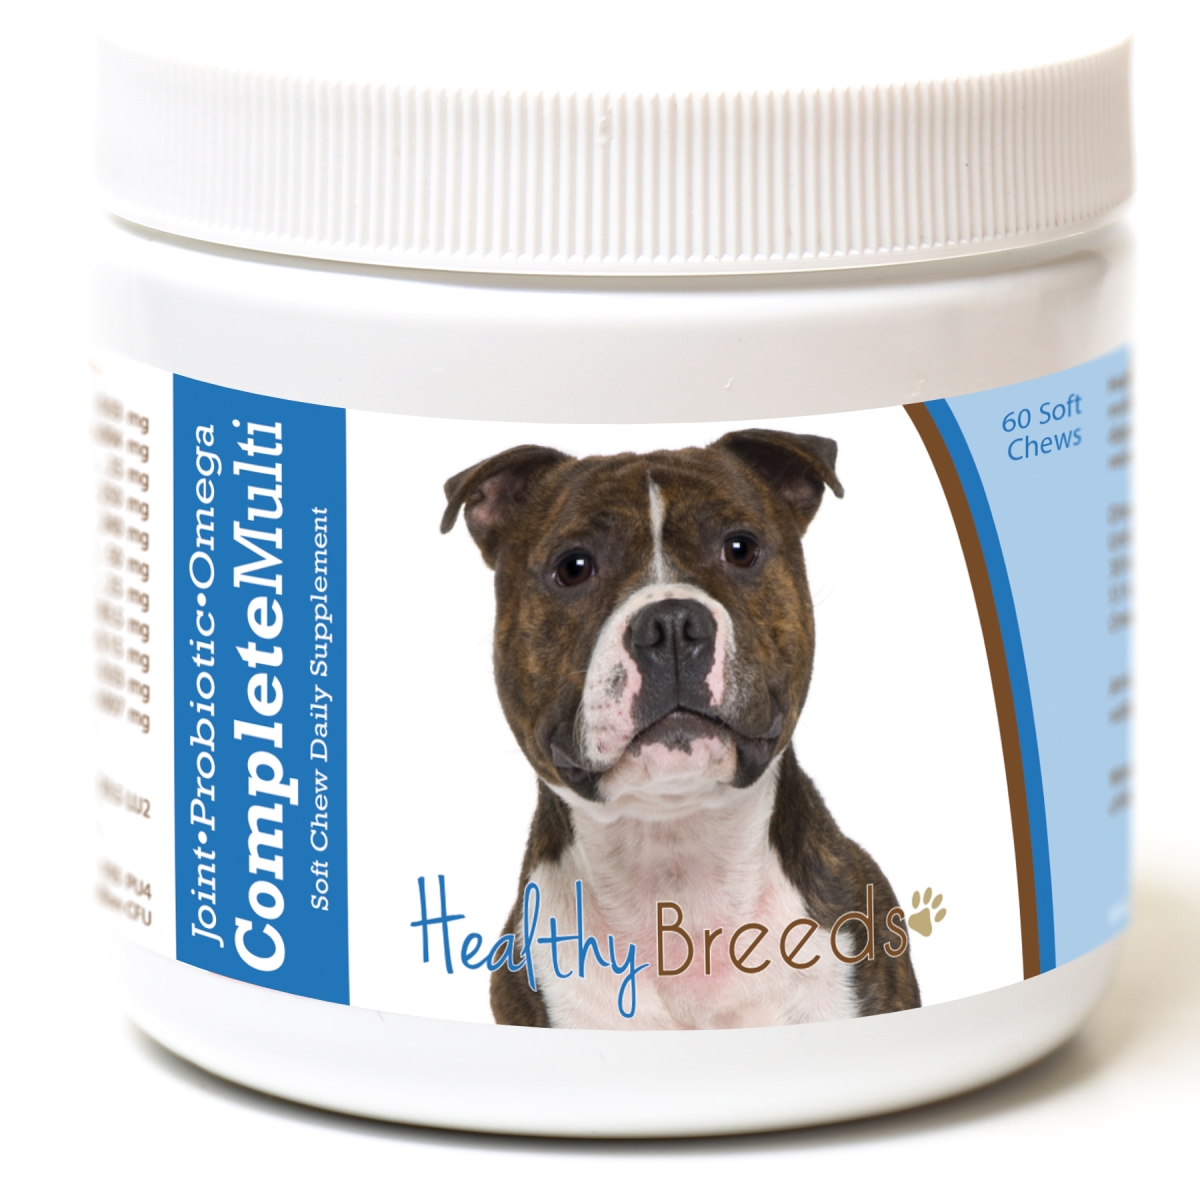 Picture of Healthy Breeds 192959009101 Staffordshire Bull Terrier all in one Multivitamin Soft Chew - 60 Count